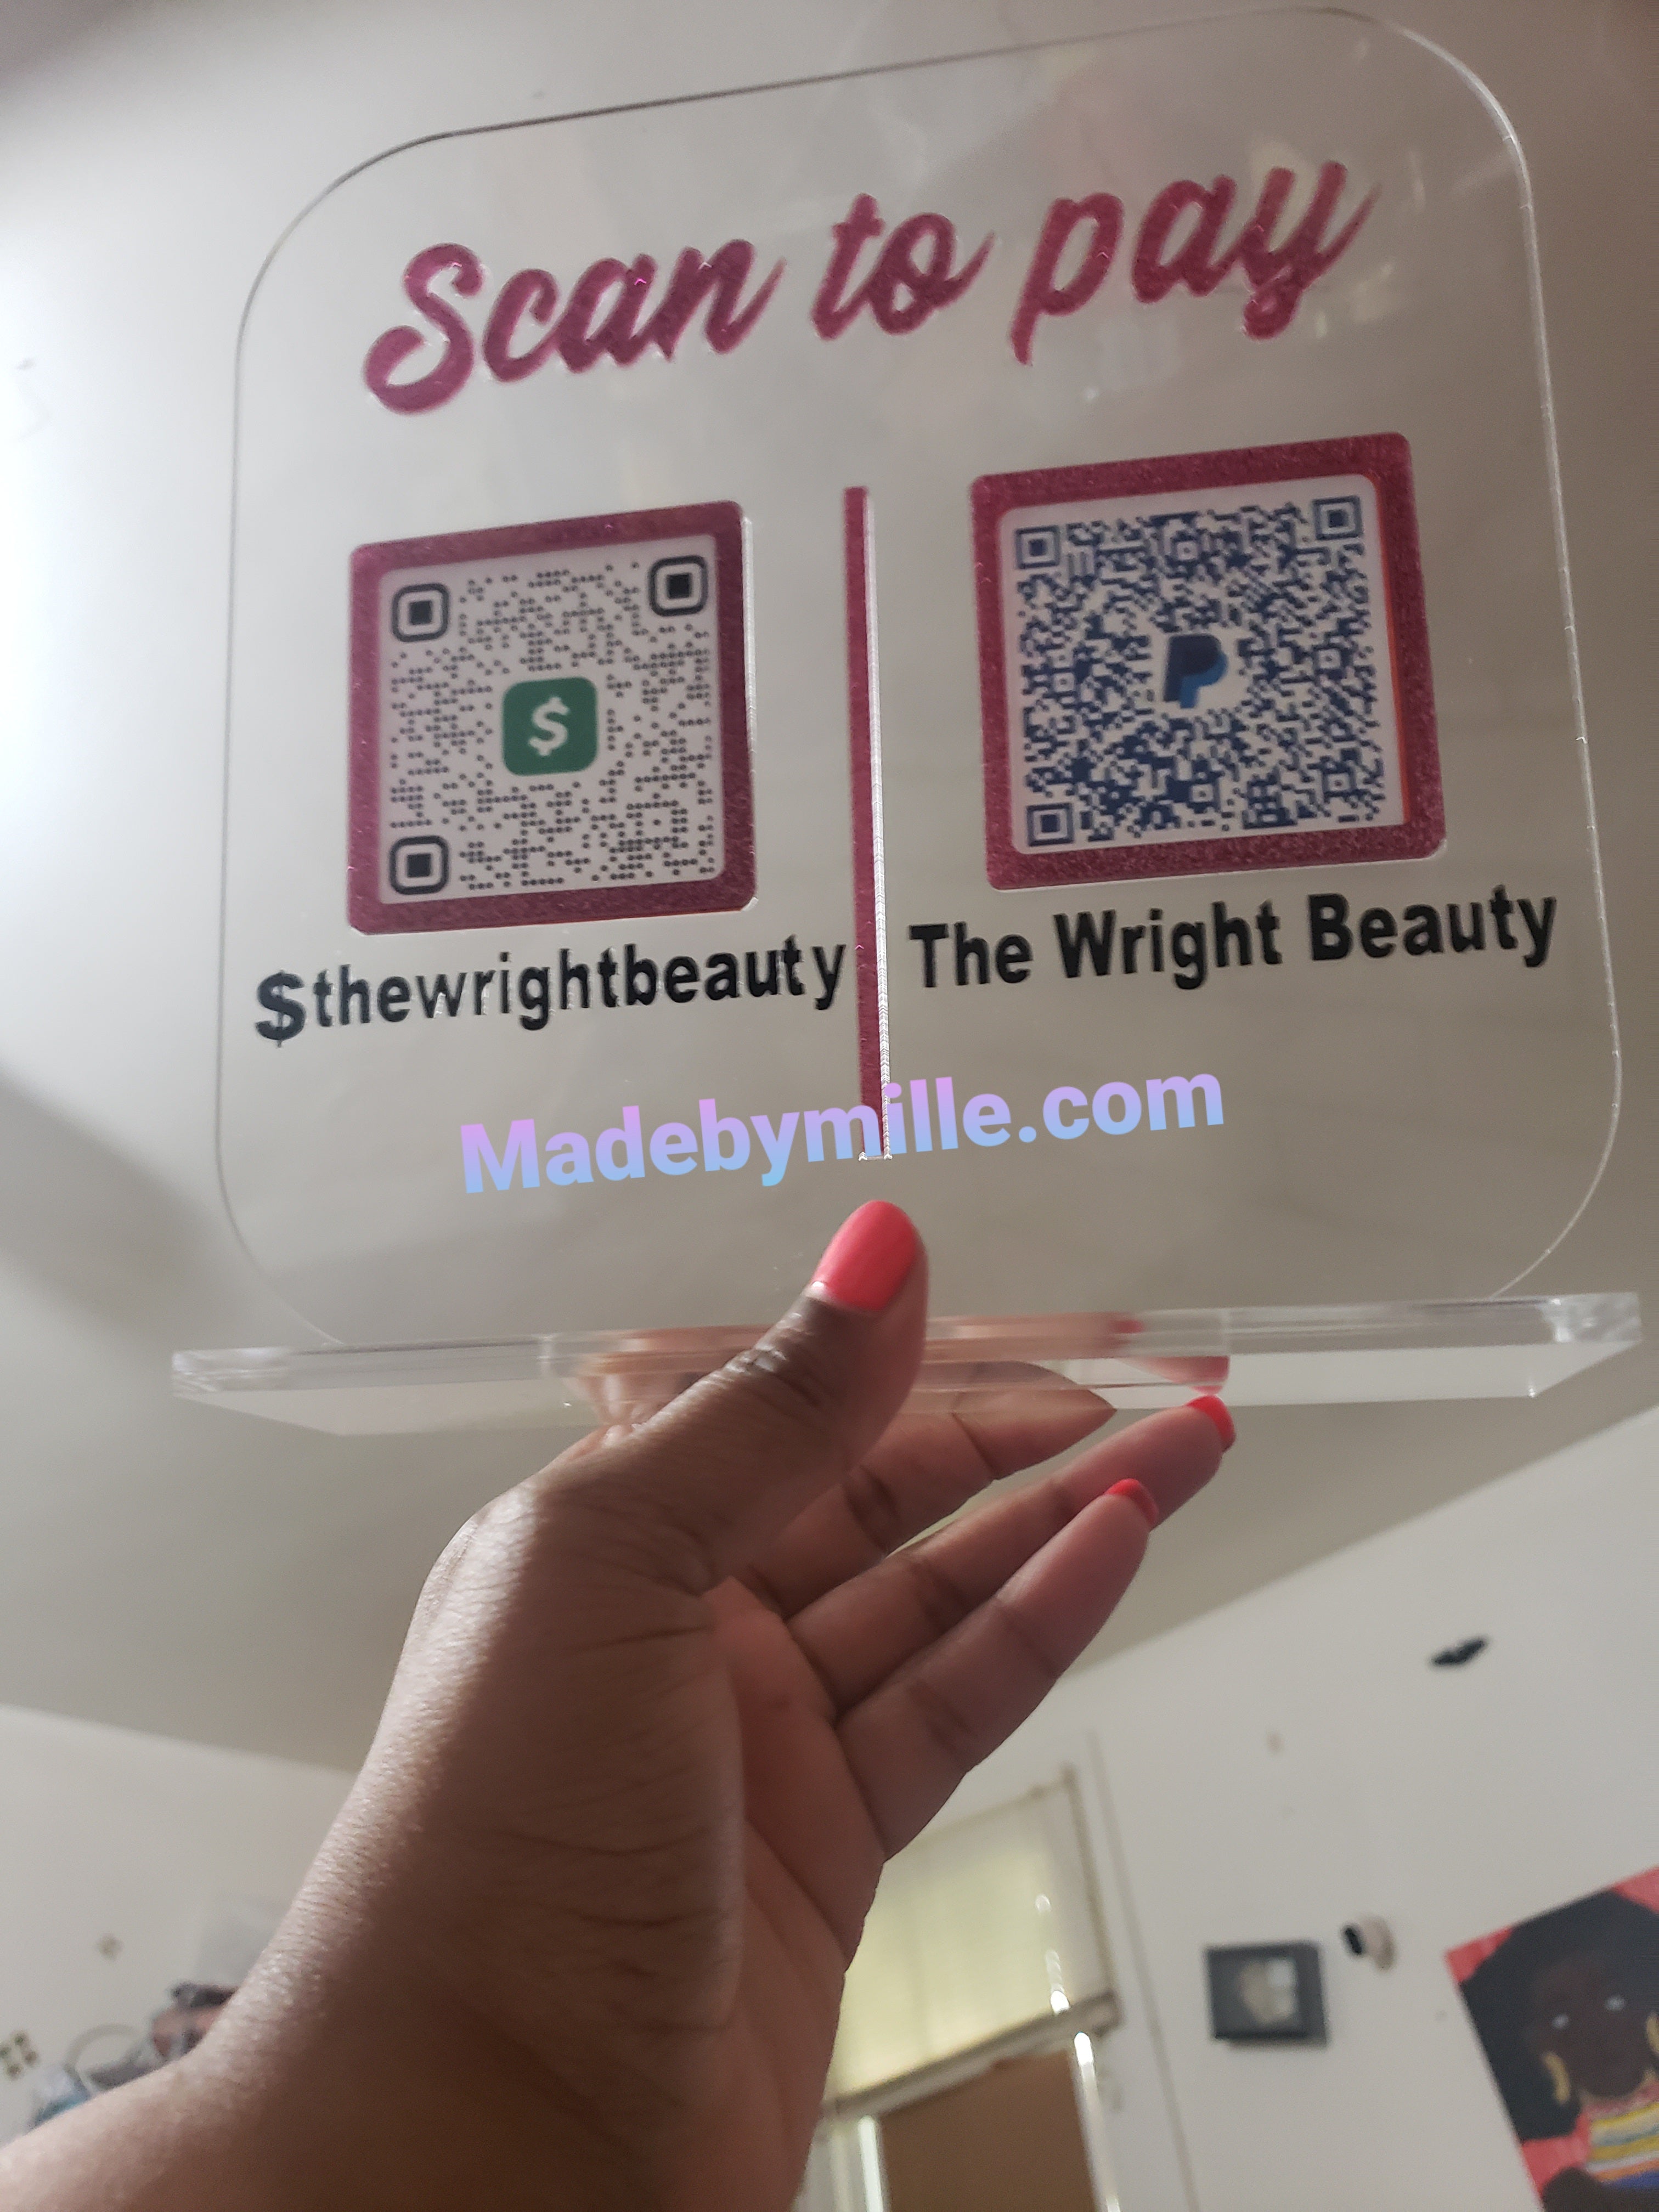 No Logo Scan to Pay / QR Board / Scan to Pay Plaque / Acrylic QR Code Sign / QR Code Scanner Plaque / Cash App Sign / PayPal Sign / Venmo Sign /